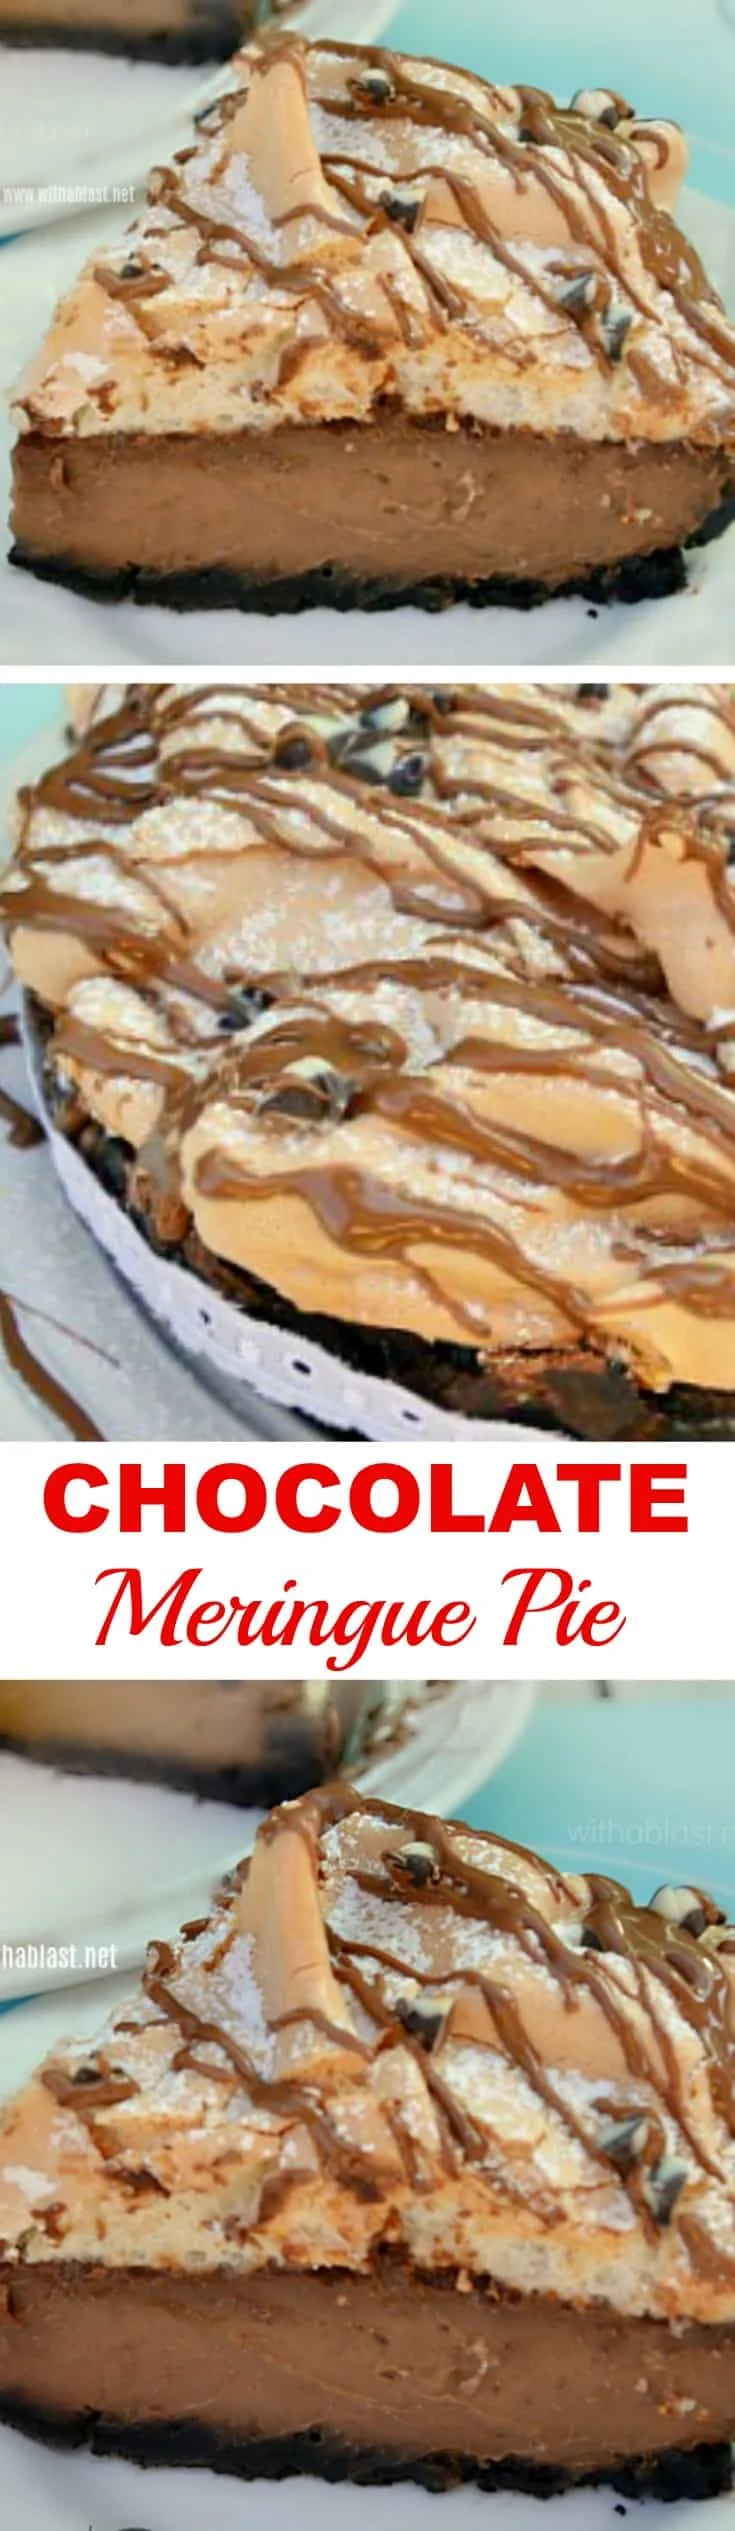 Chocolate Meringue Pie has a smooth, silky, almost ganache-like filling with a bit of an unusual, divine Meringue topping - so easy to make! #ChocolatePie #ChocolateMeringue 